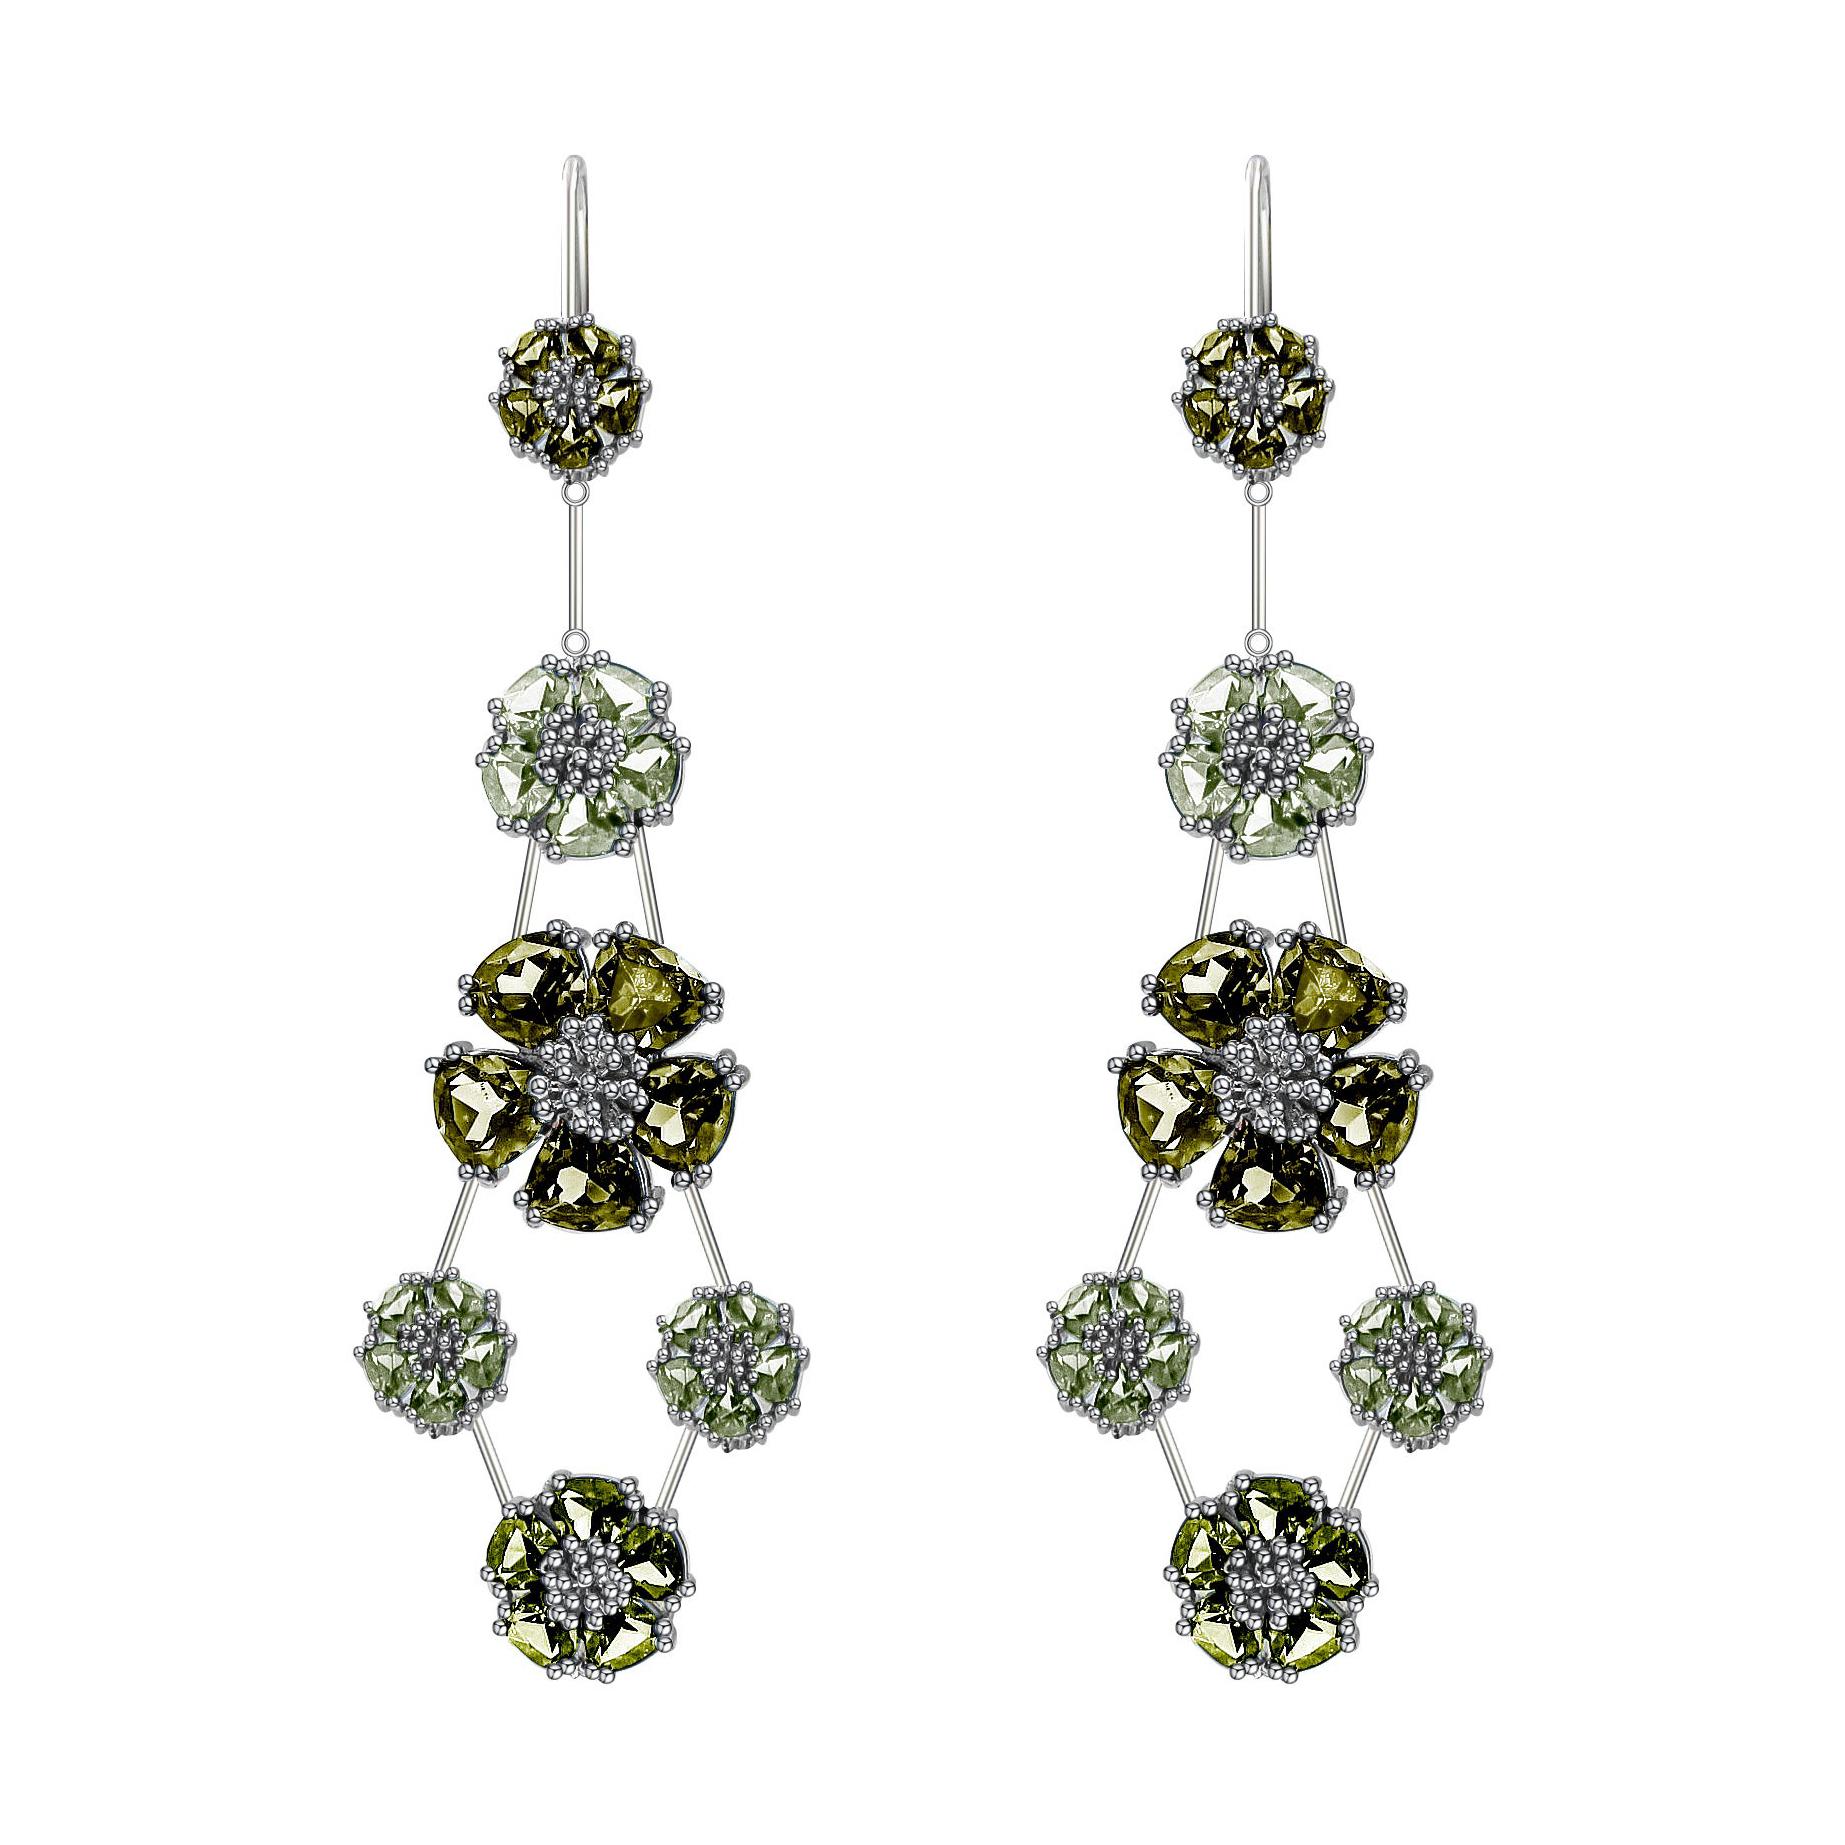 Light and Olive Green Amethyst Blossom Double-Tier Chandelier Earrings